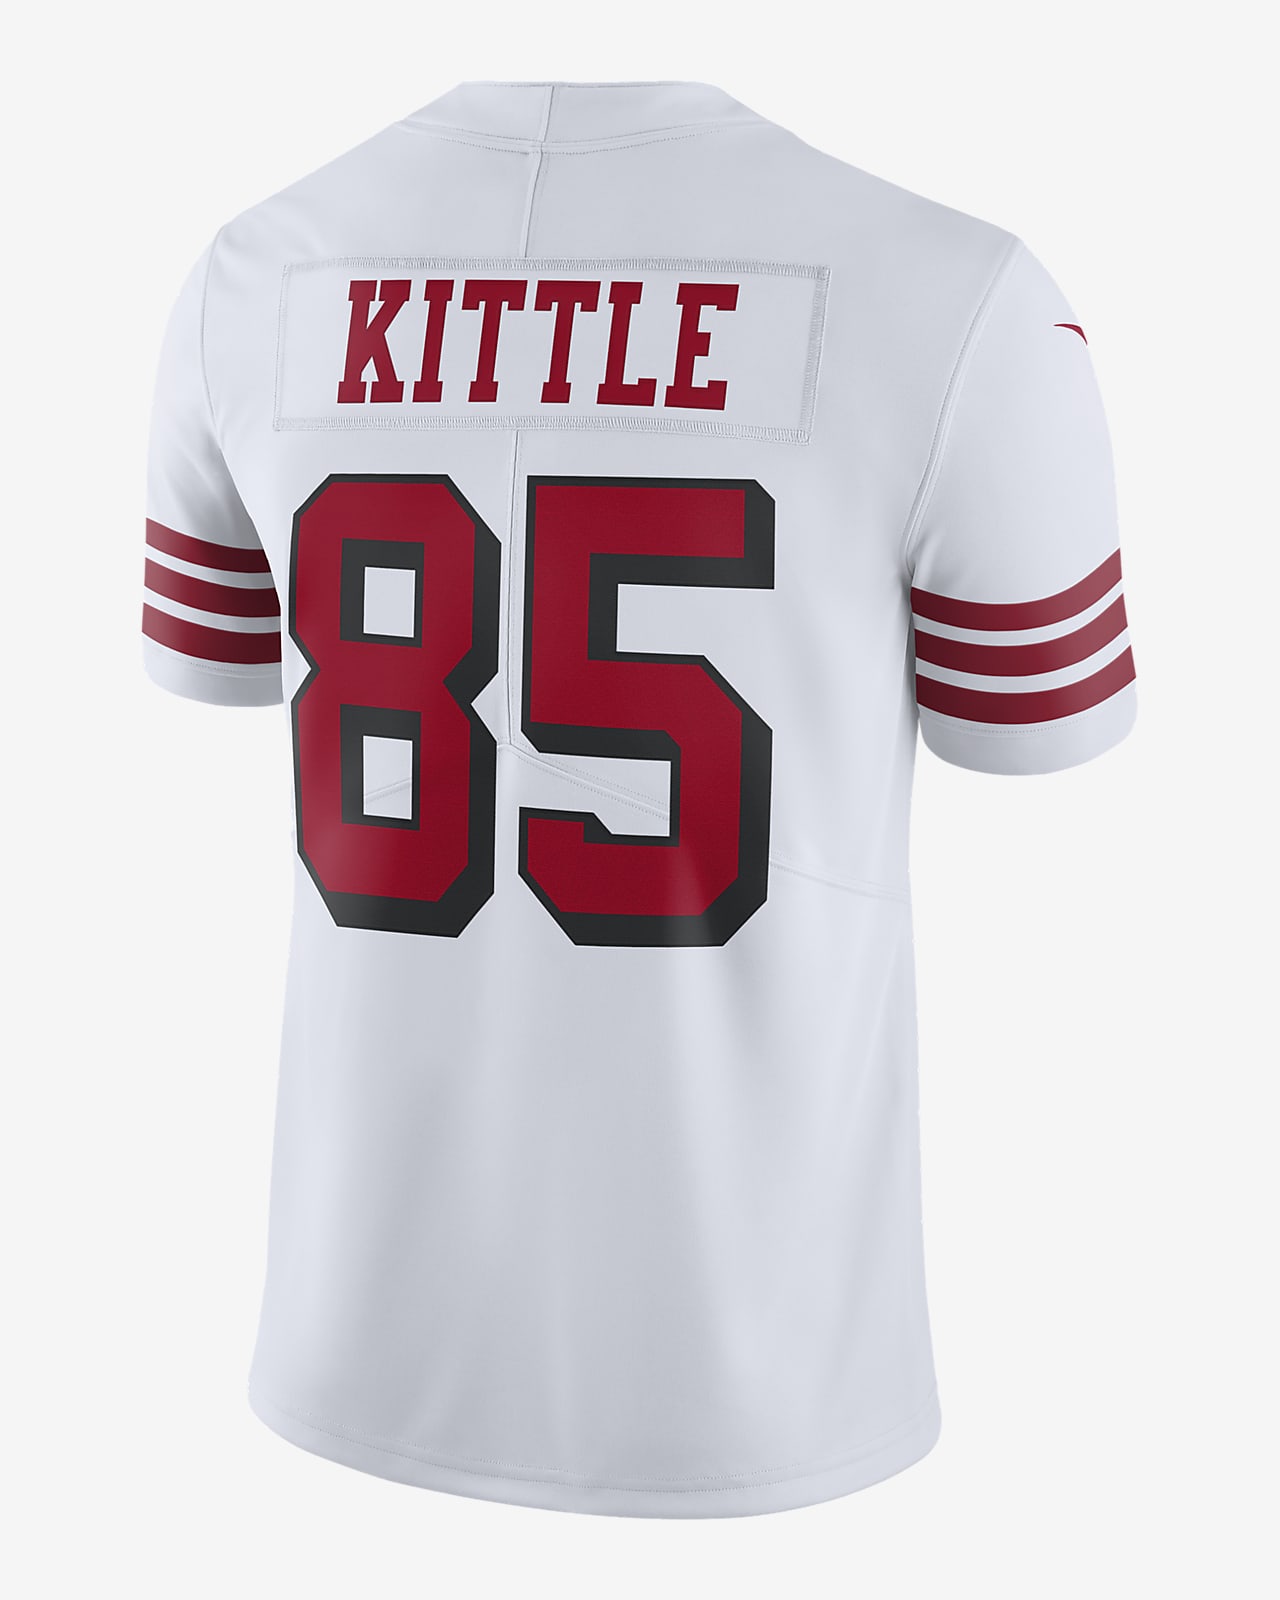 george kittle jersey stitched